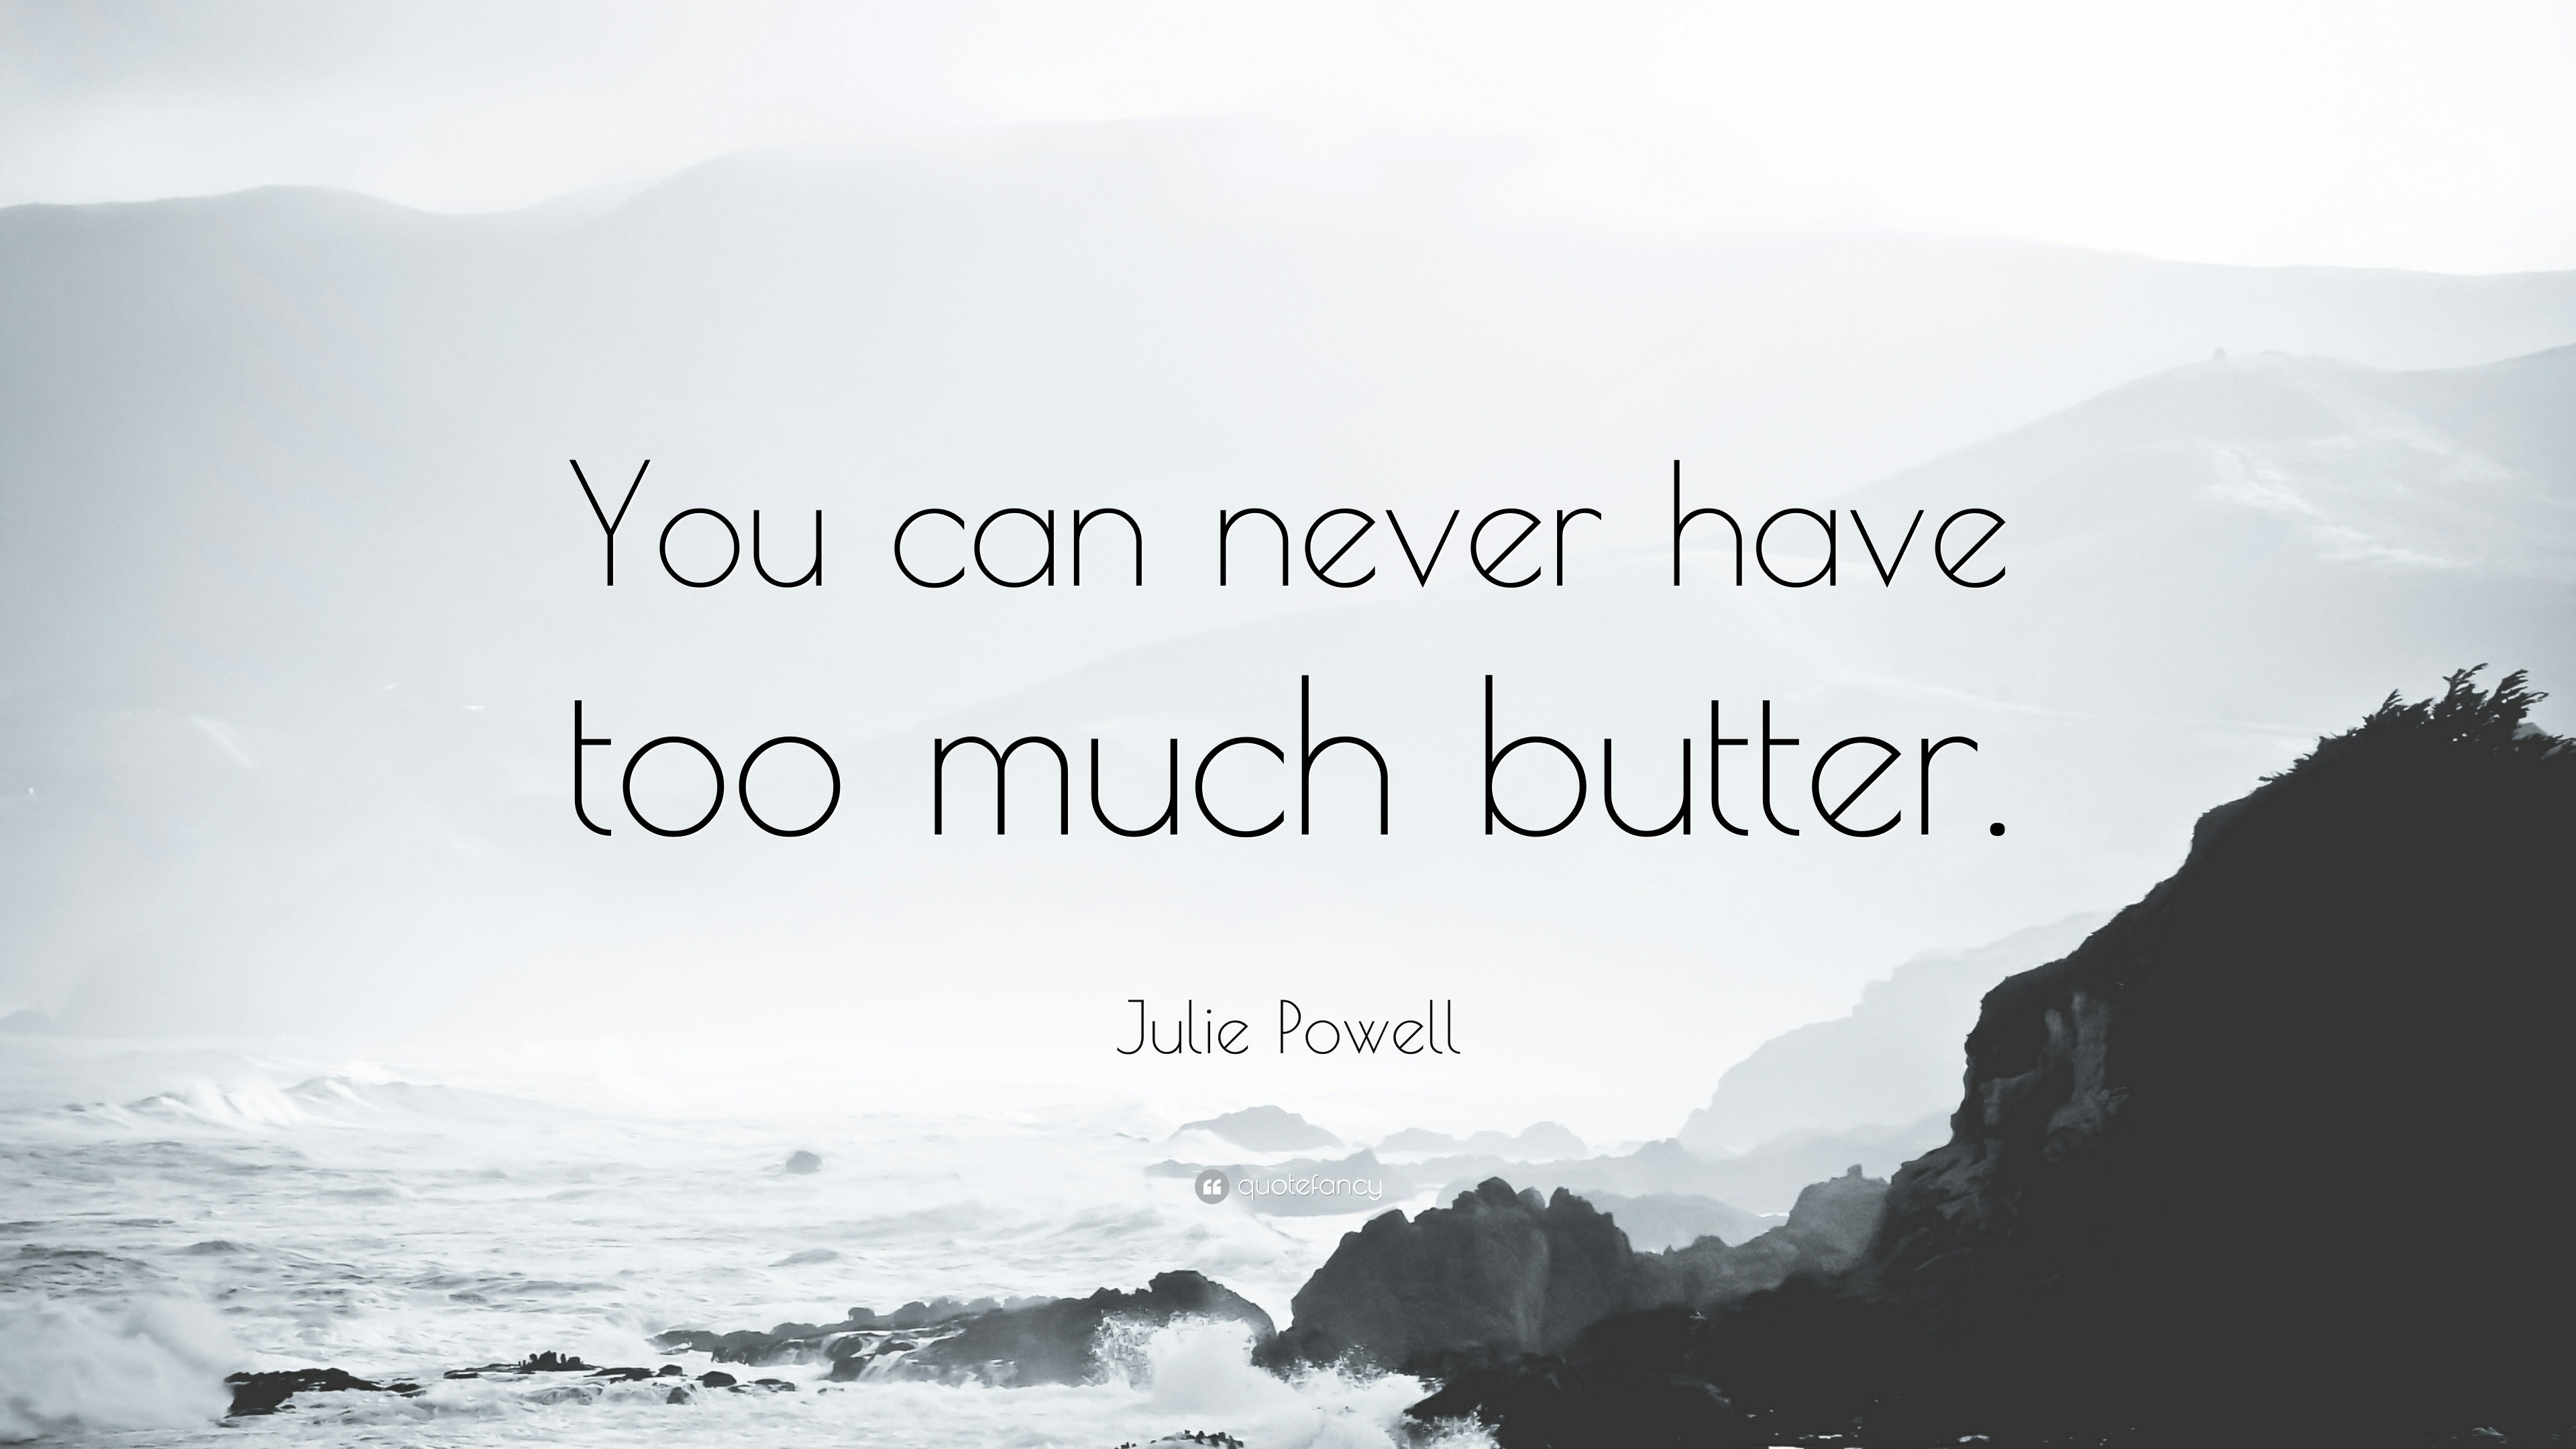 1421696-Julie-Powell-Quote-You-can-never-have-too-much-butter.jpg